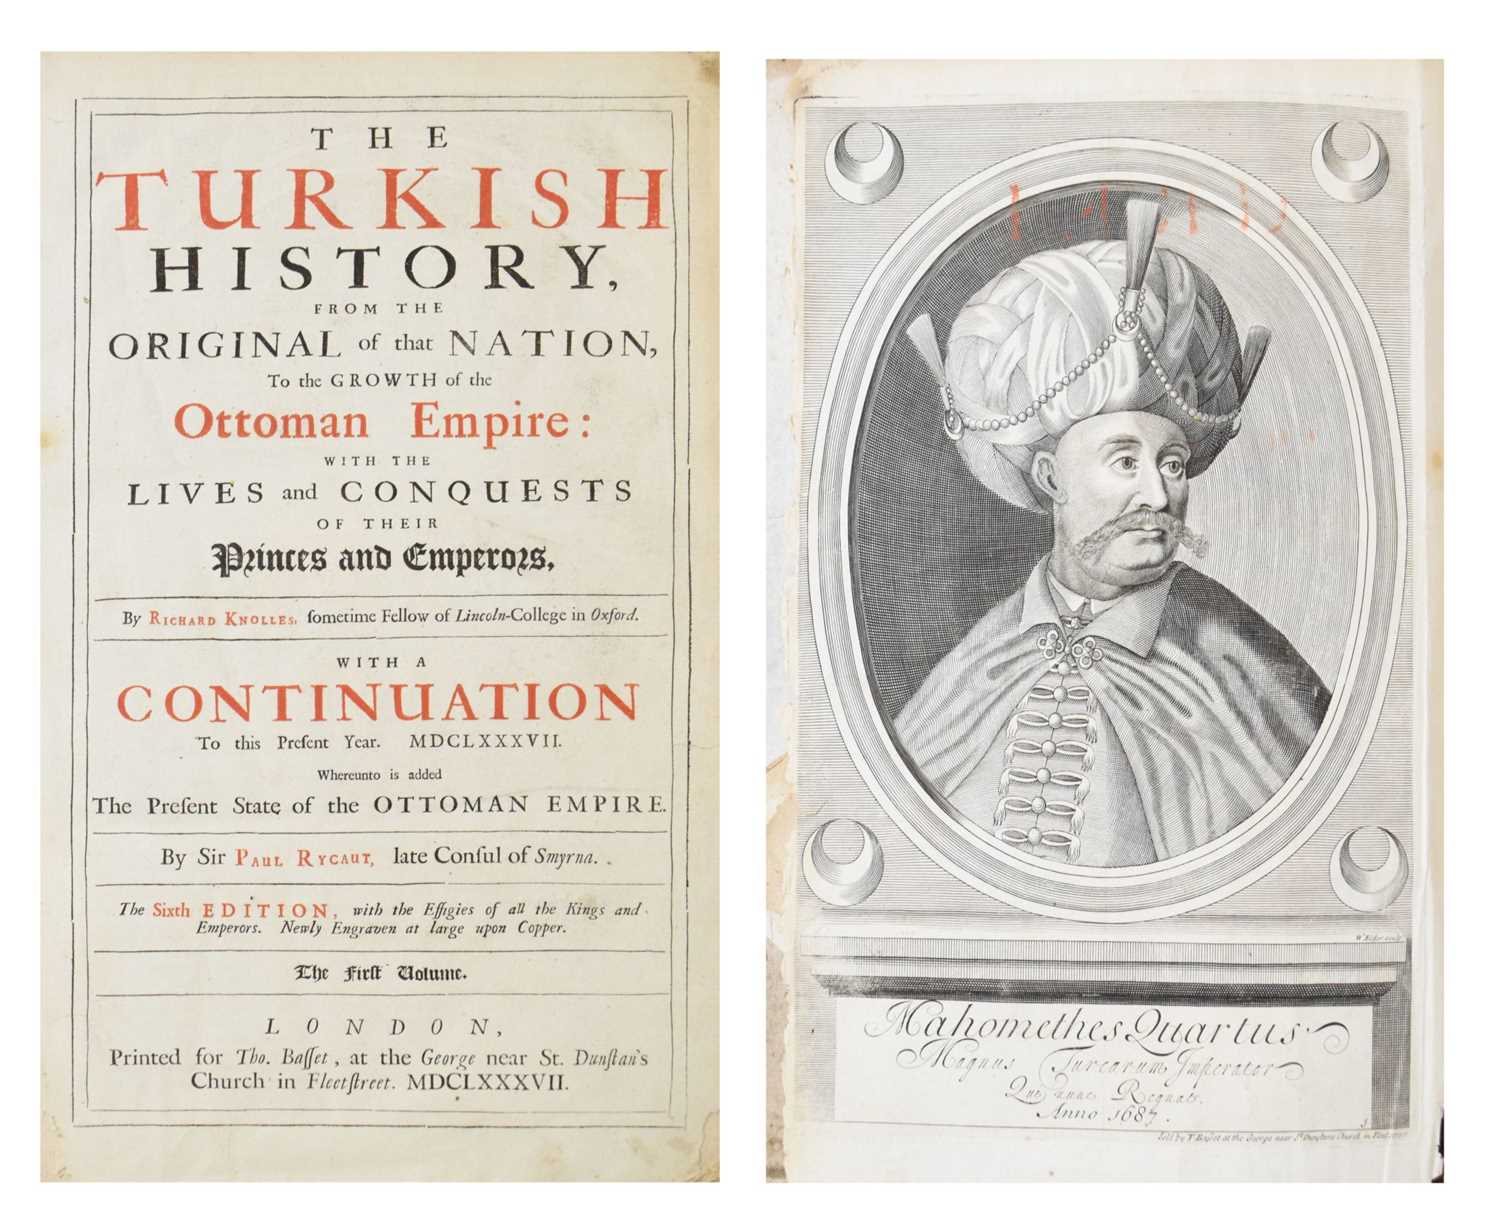 The Turkish History from the Original of that Nation to the Growth of the Ottoman Empire